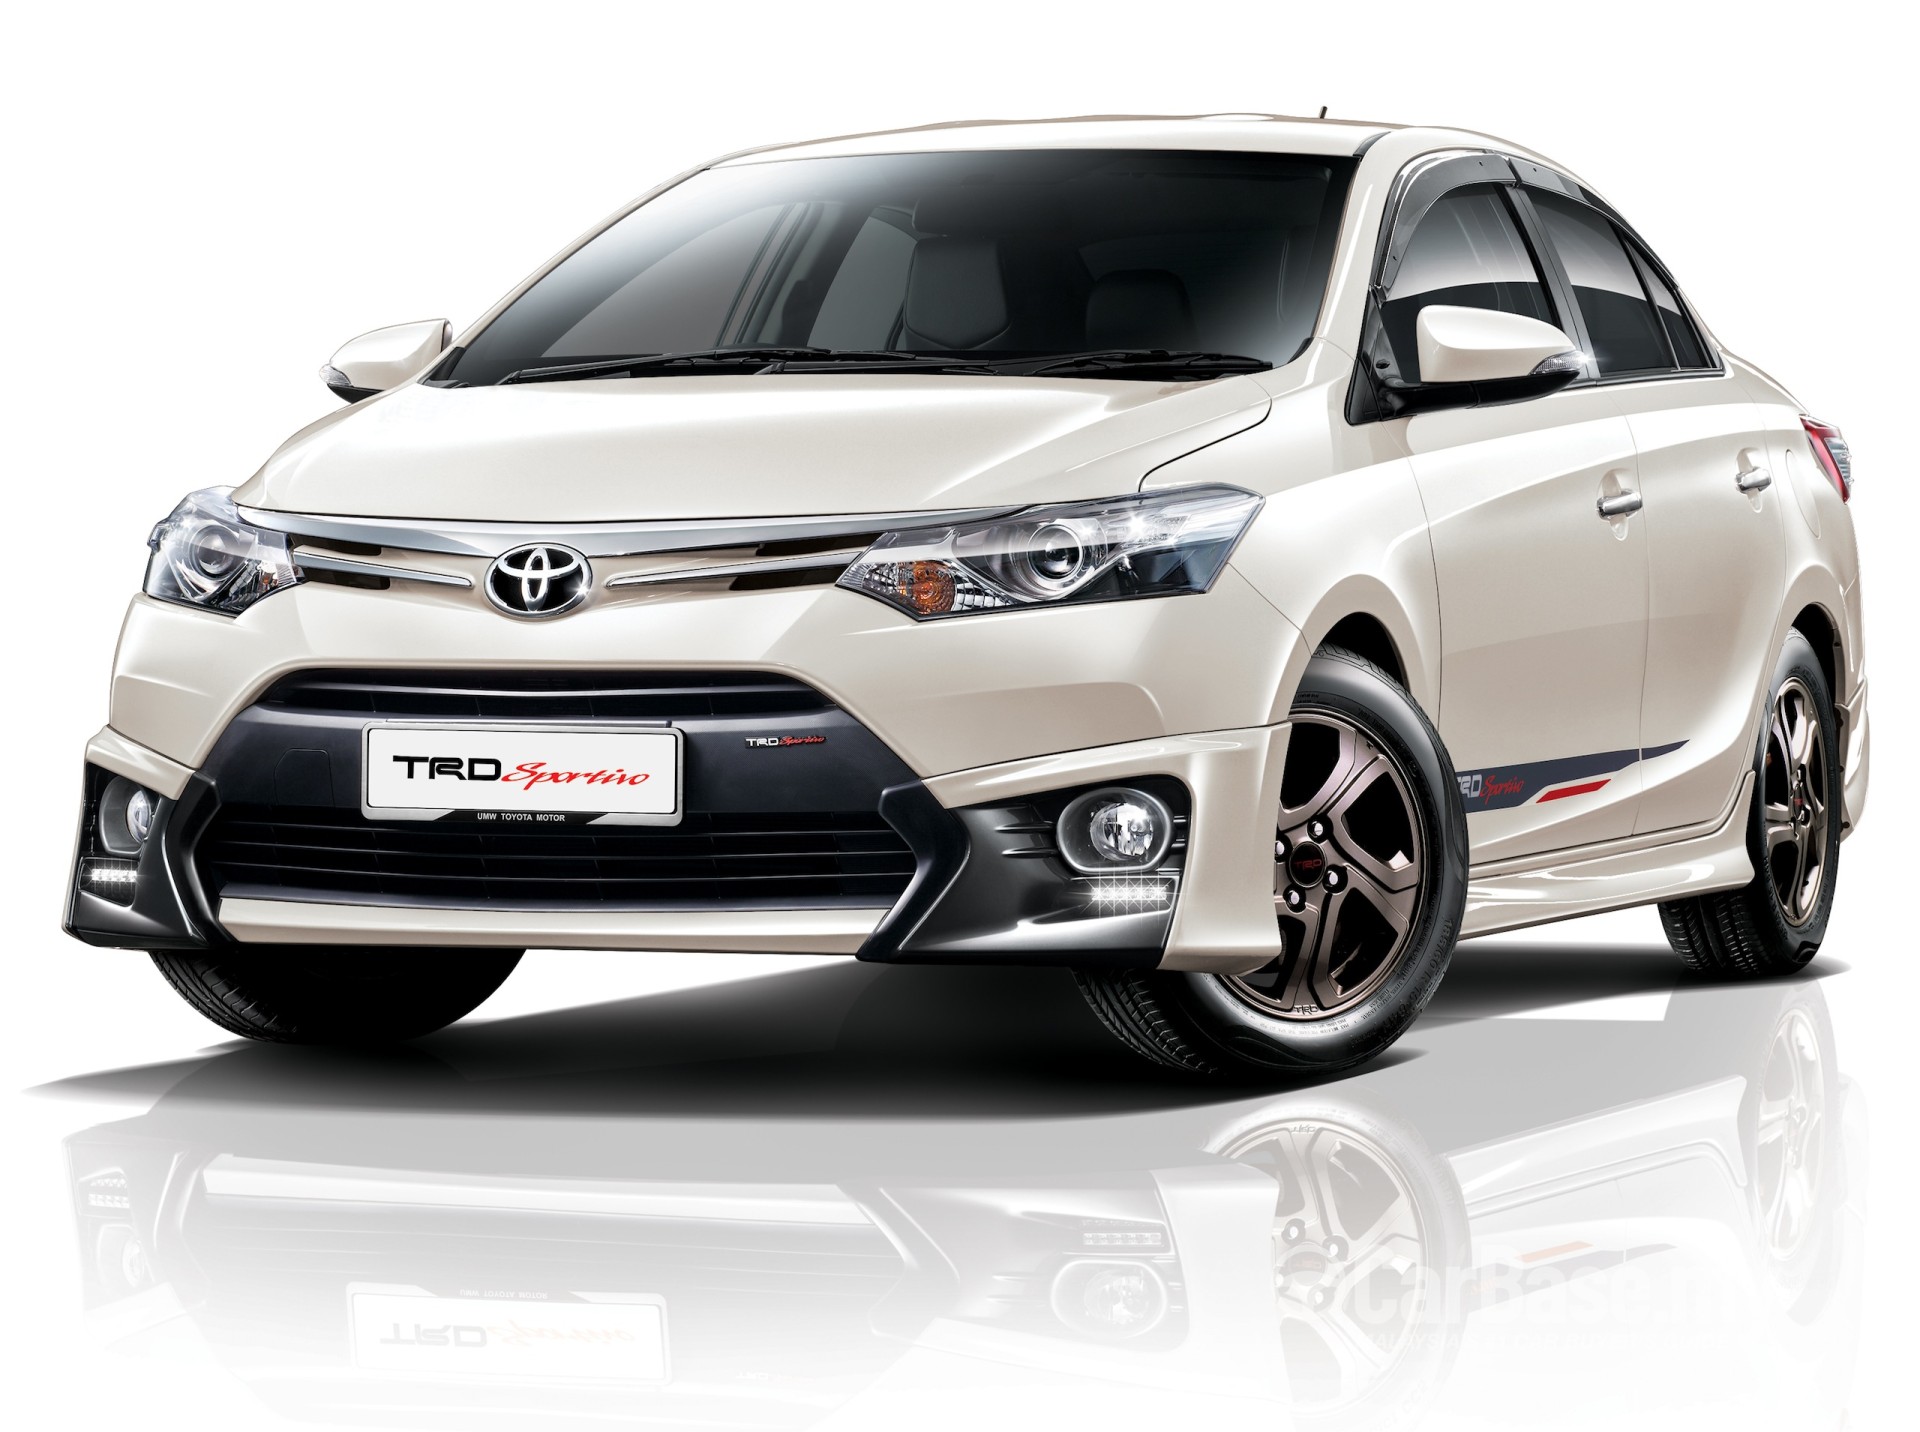 Toyota Vios NCP150 (2013) Exterior Image #3515 in Malaysia - Reviews ...